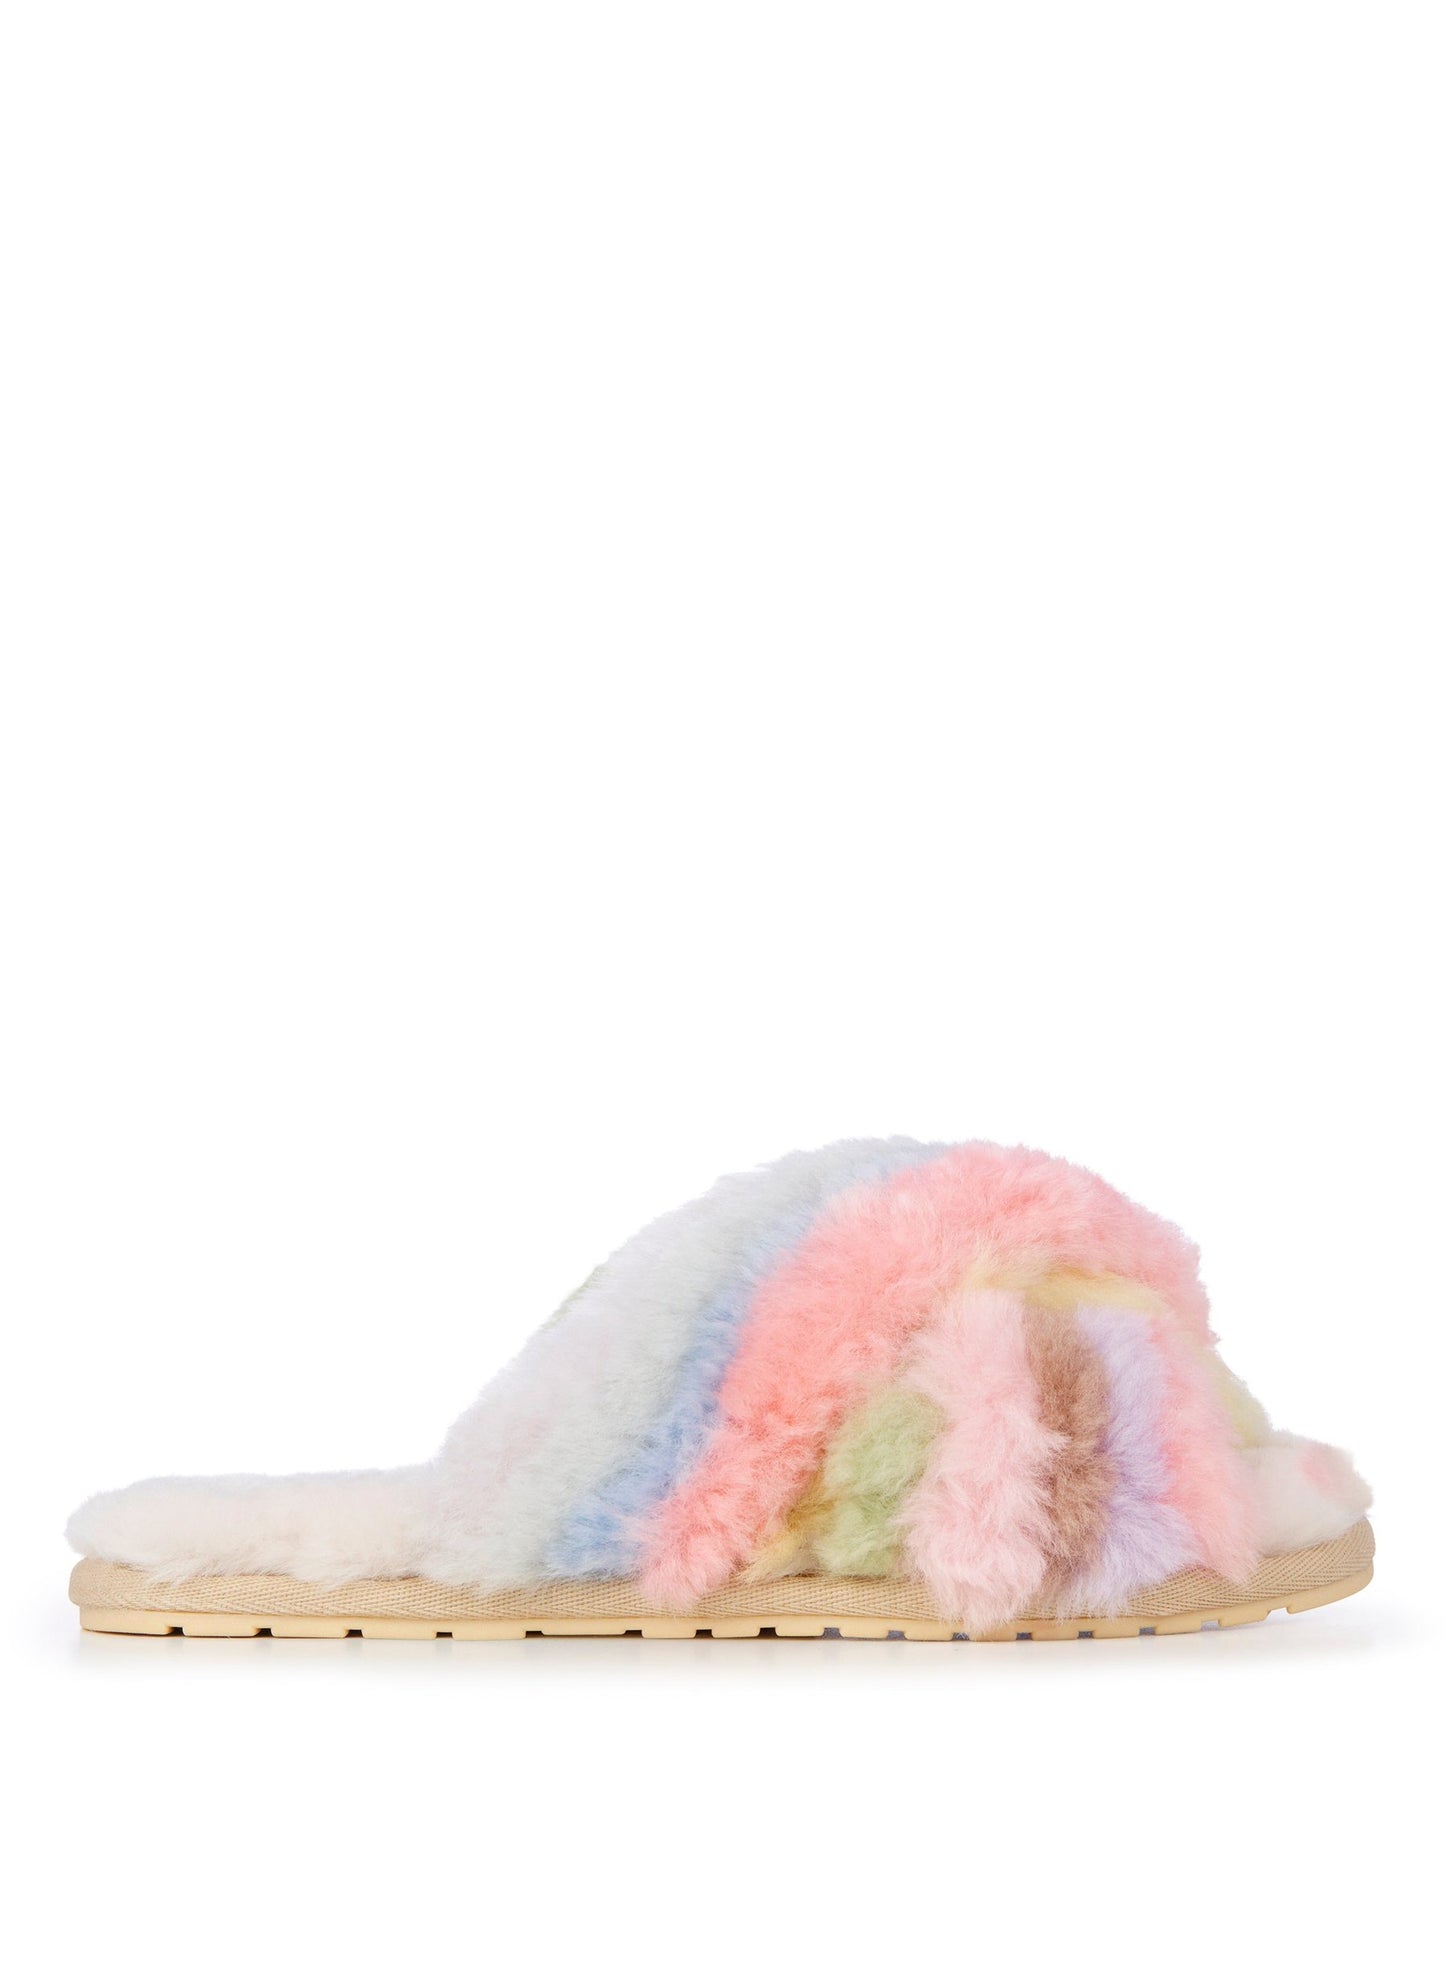 Mayberry Slippers - Rainbow Pastel